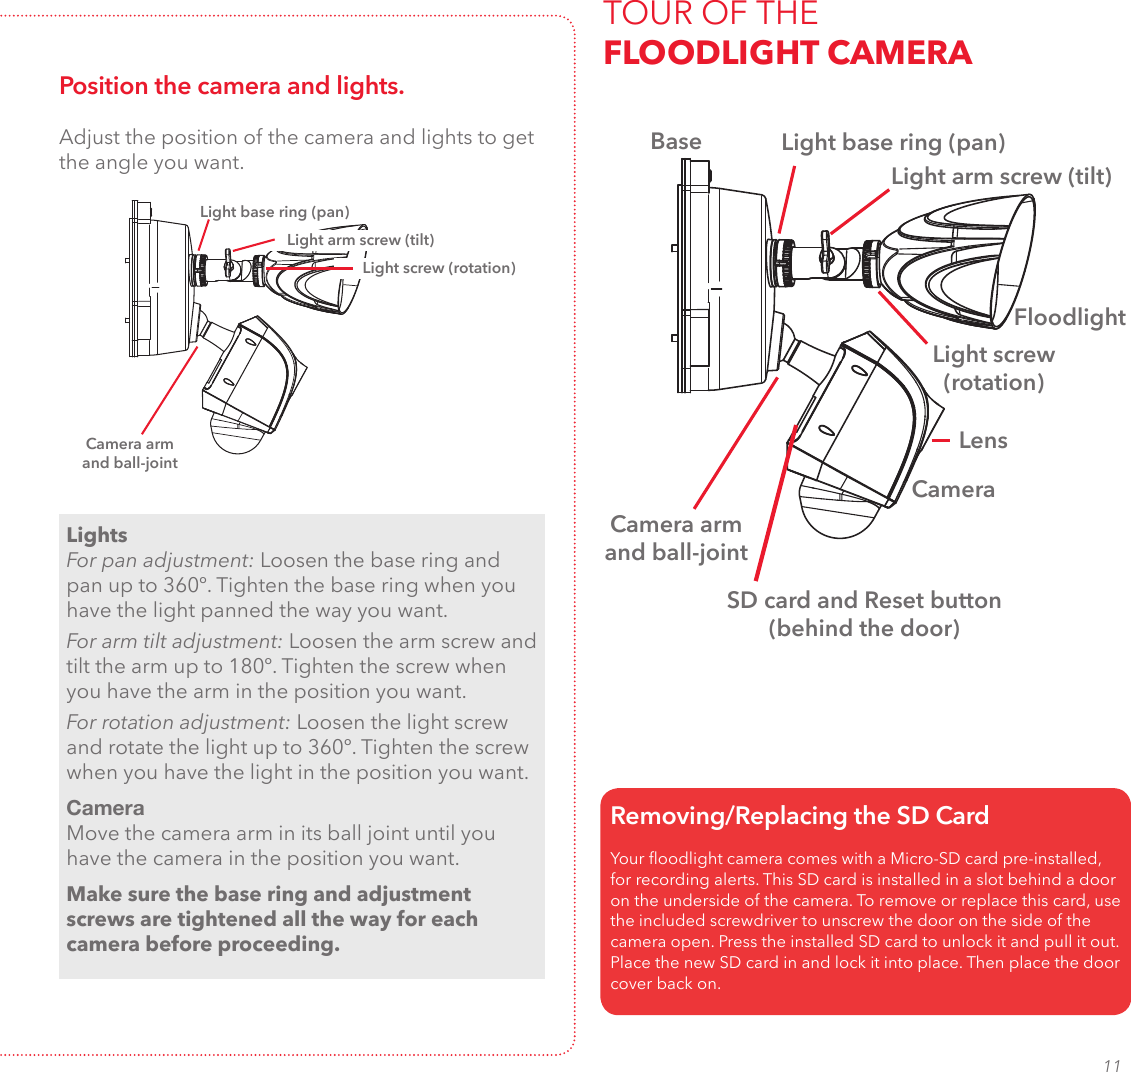 11TOUR OF THE  FLOODLIGHT CAMERALight base ring (pan)Light arm screw (tilt)Camera arm and ball-jointBaseFloodlightCameraYour oodlight camera comes with a Micro-SD card pre-installed, for recording alerts. This SD card is installed in a slot behind a door on the underside of the camera. To remove or replace this card, use the included screwdriver to unscrew the door on the side of the camera open. Press the installed SD card to unlock it and pull it out. Place the new SD card in and lock it into place. Then place the door cover back on. Removing/Replacing the SD CardSD card and Reset button (behind the door) LensPosition the camera and lights.LightsFor pan adjustment: Loosen the base ring and pan up to 360º. Tighten the base ring when you have the light panned the way you want.For arm tilt adjustment: Loosen the arm screw and tilt the arm up to 180º. Tighten the screw when you have the arm in the position you want.For rotation adjustment: Loosen the light screw and rotate the light up to 360º. Tighten the screw when you have the light in the position you want.CameraMove the camera arm in its ball joint until you have the camera in the position you want.Make sure the base ring and adjustment screws are tightened all the way for each camera before proceeding.Light base ring (pan)Light arm screw (tilt)Light screw (rotation)Adjust the position of the camera and lights to get the angle you want.Camera arm and ball-jointLight screw (rotation)